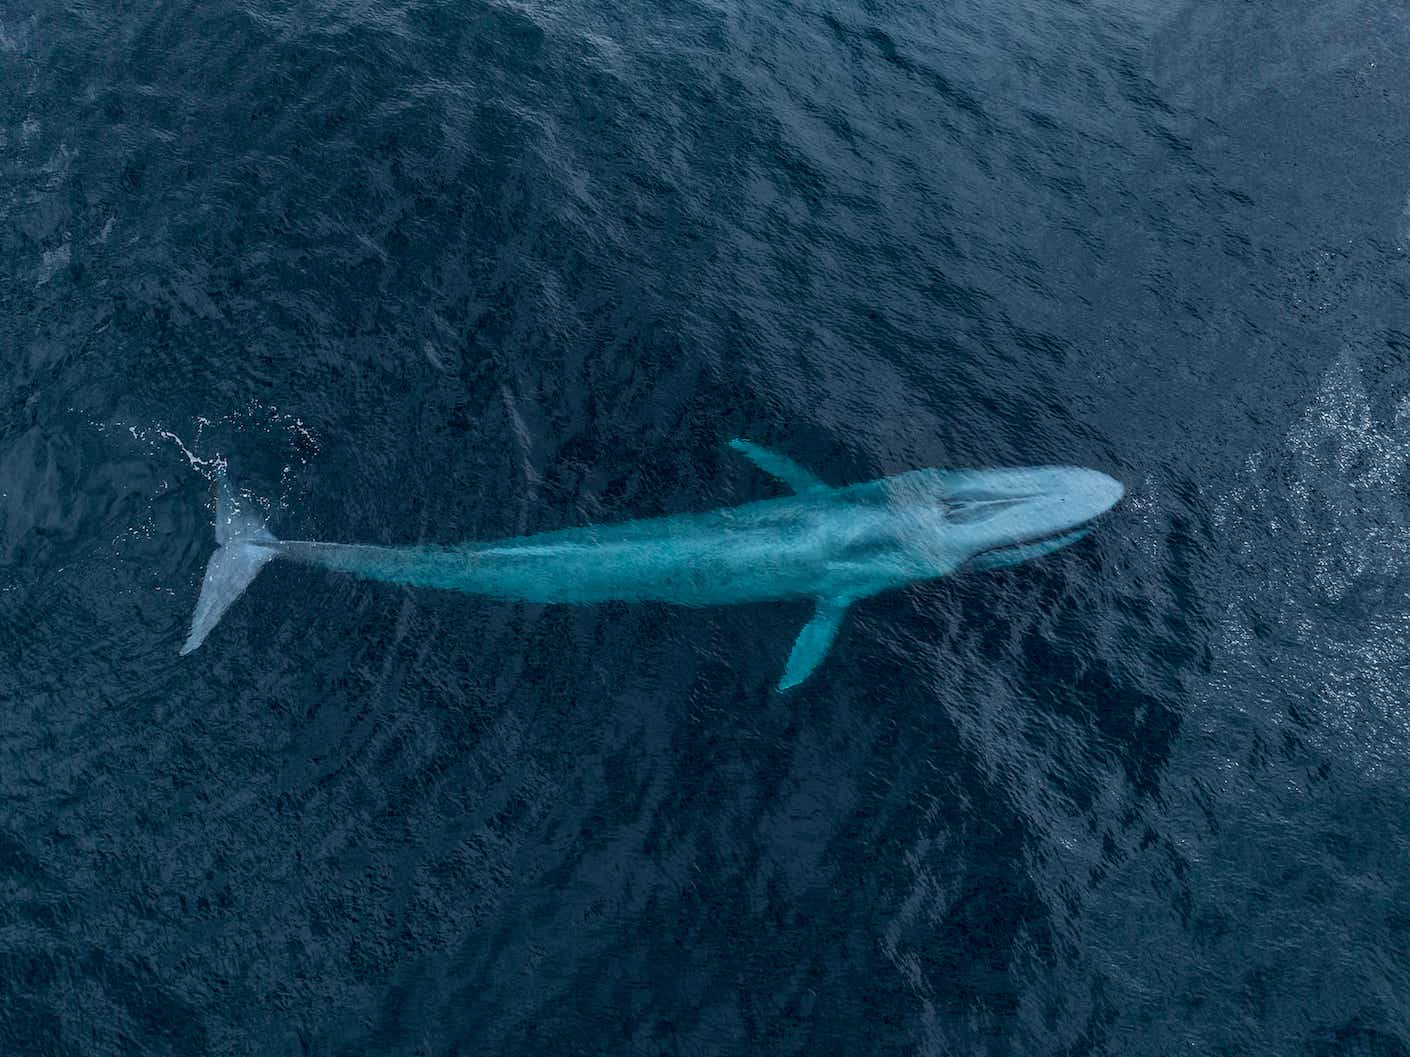 blue whale from Paul Nicklen's drone